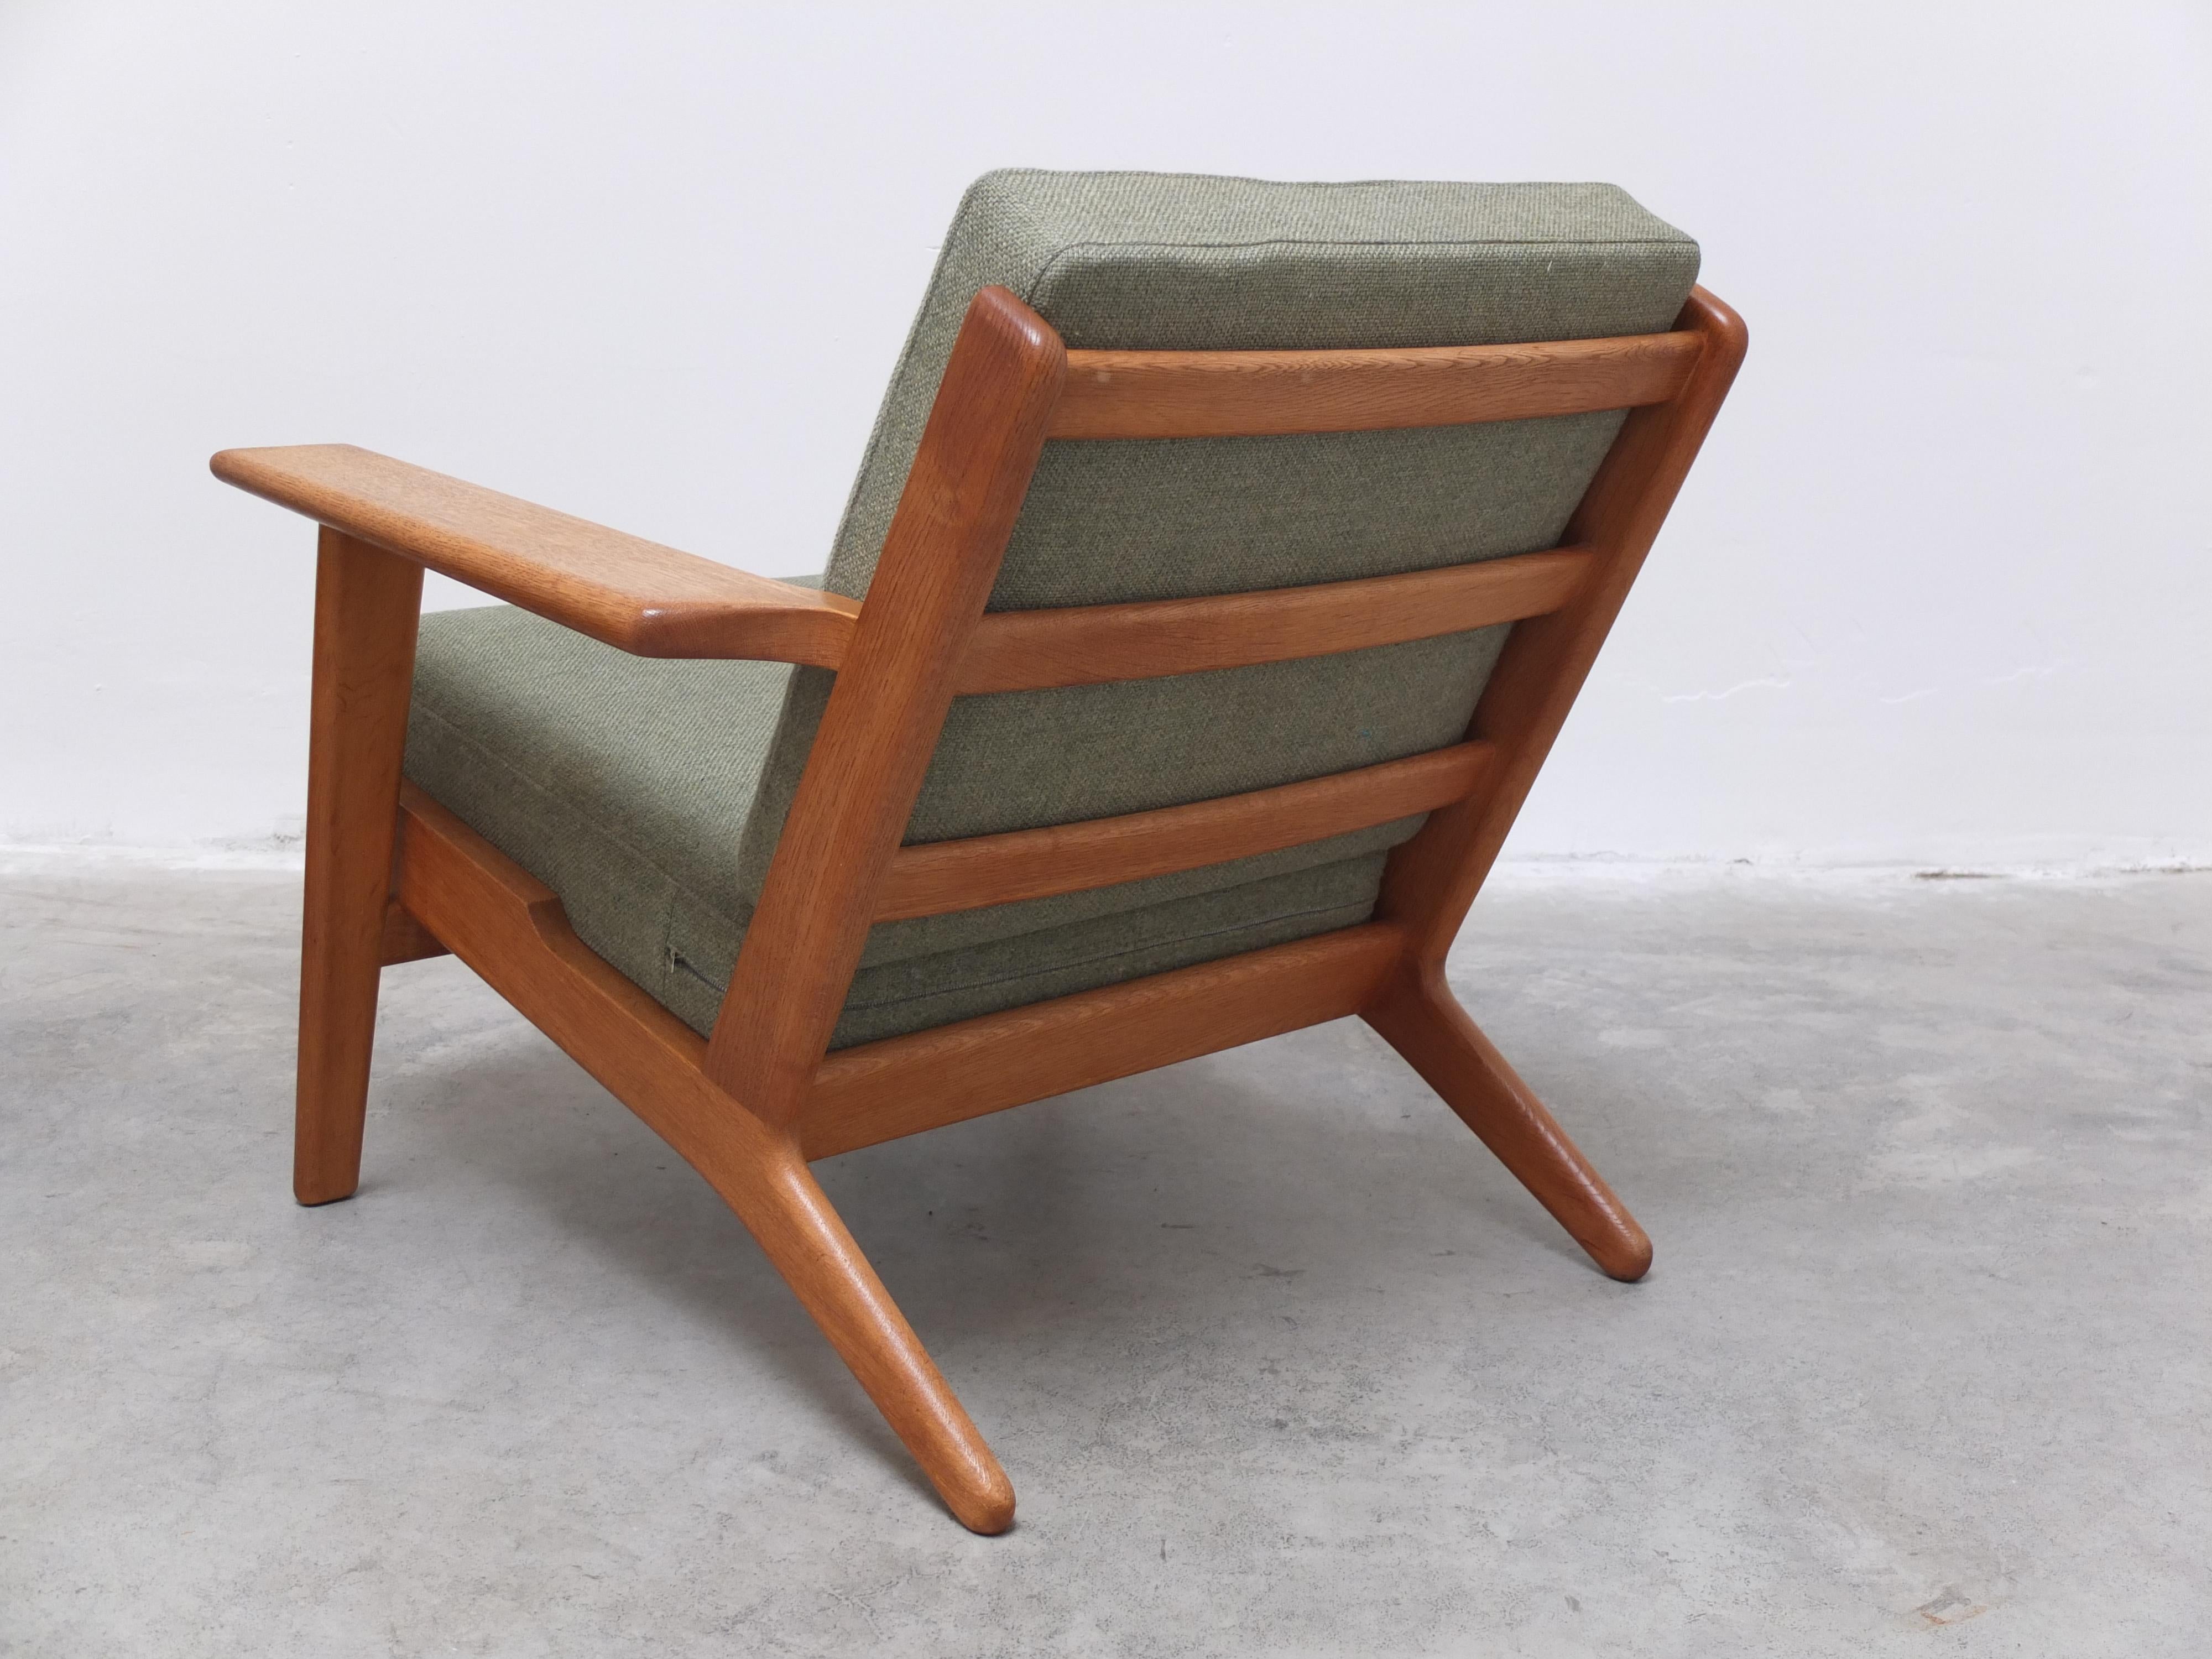 Early Pair of Oak 'GE-290' Lounge Chairs by Hans Wegner for Getama, 1953 For Sale 8